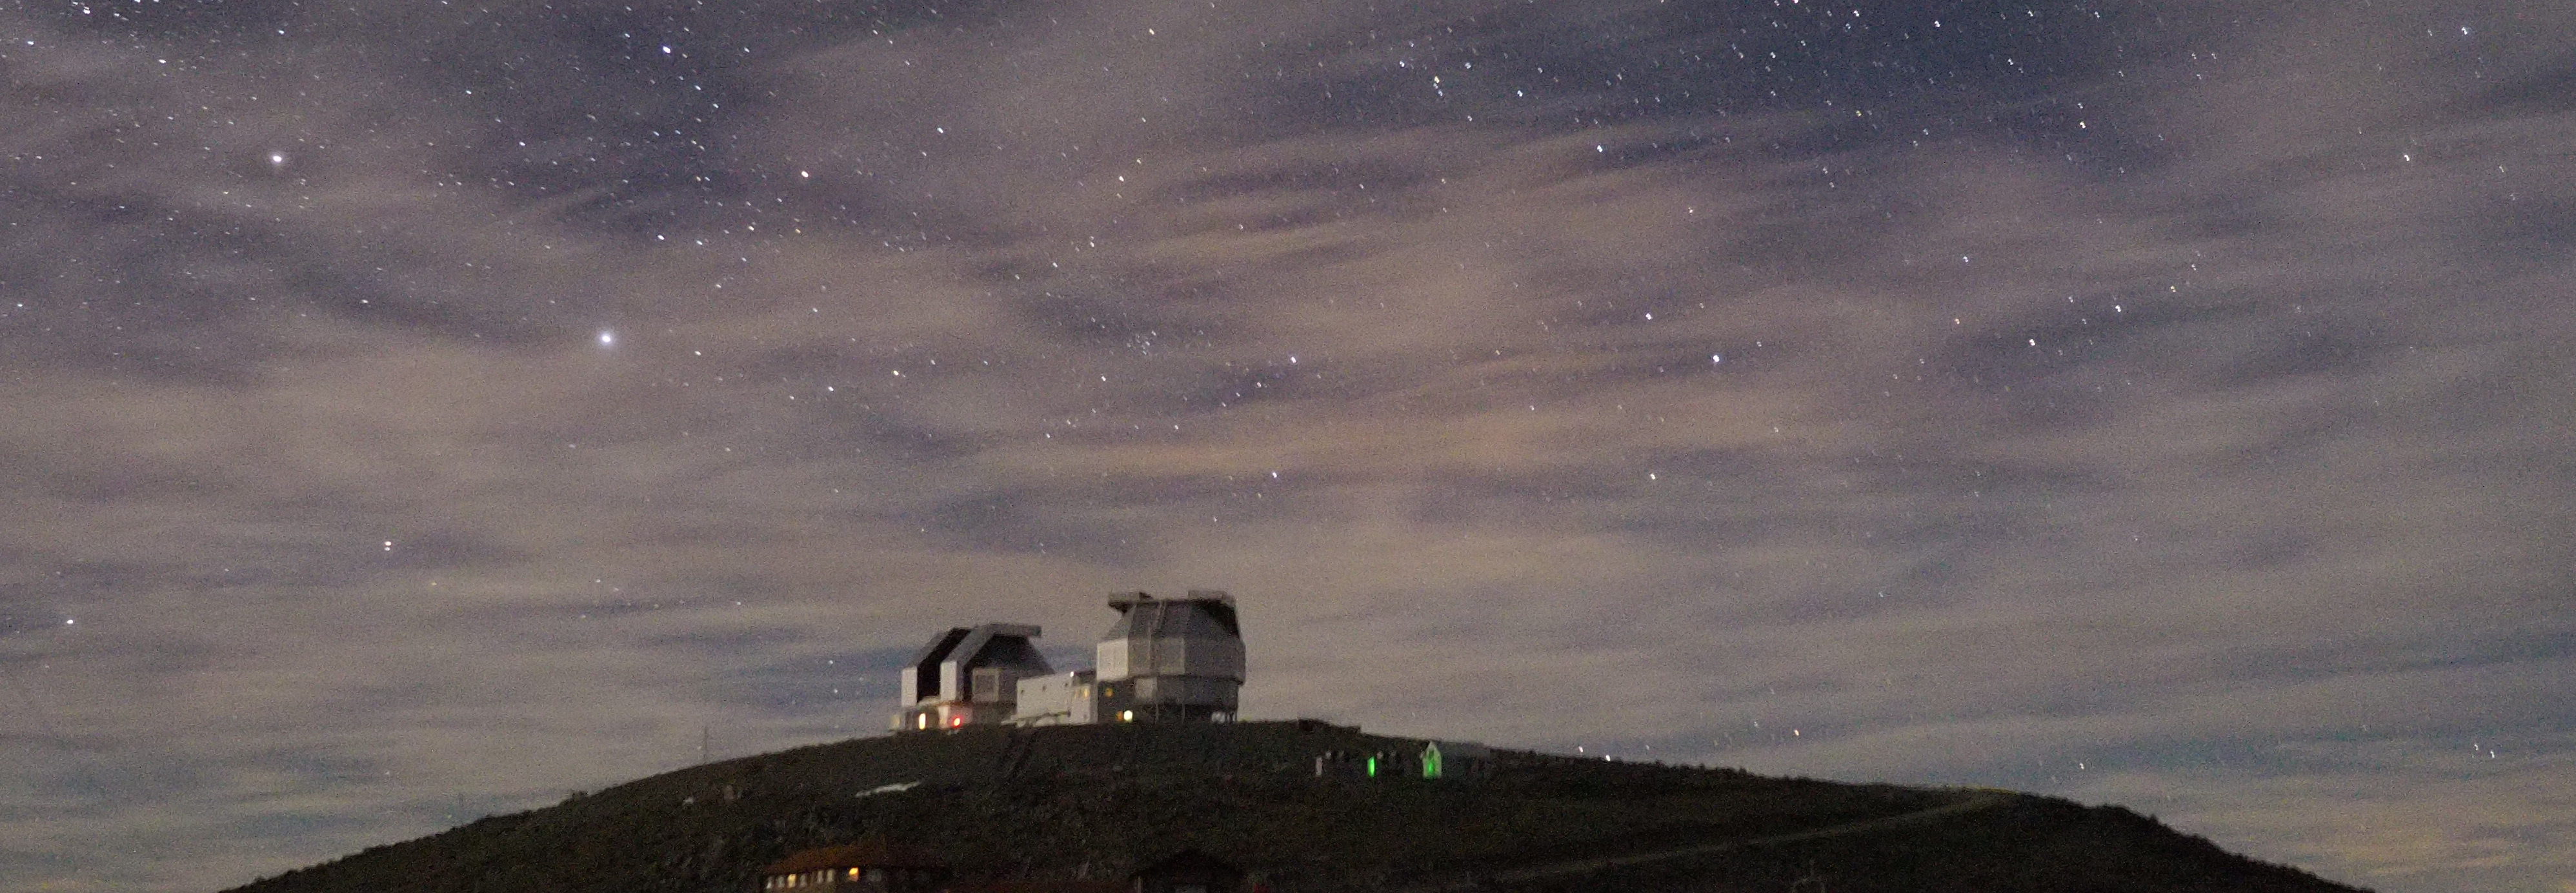 Stars and clouds over the Magellan Telescopes, Las Campanas Observatory. Photo by Ewan Douglas, Aug 2017.